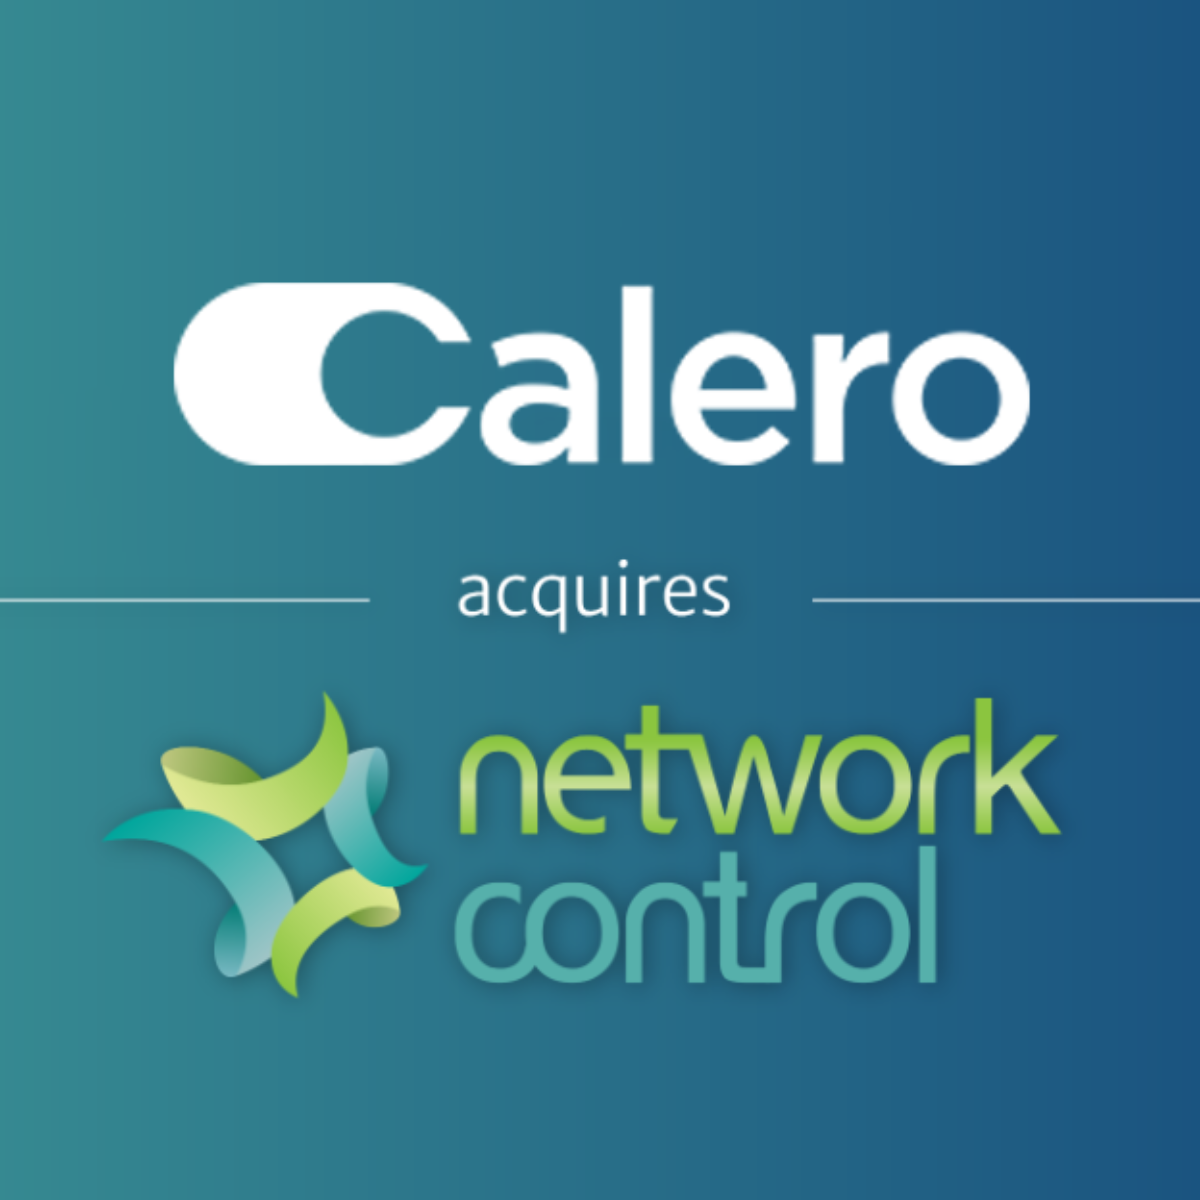 Calero Acquires Network Control, Solidifying Mid-Market Presence